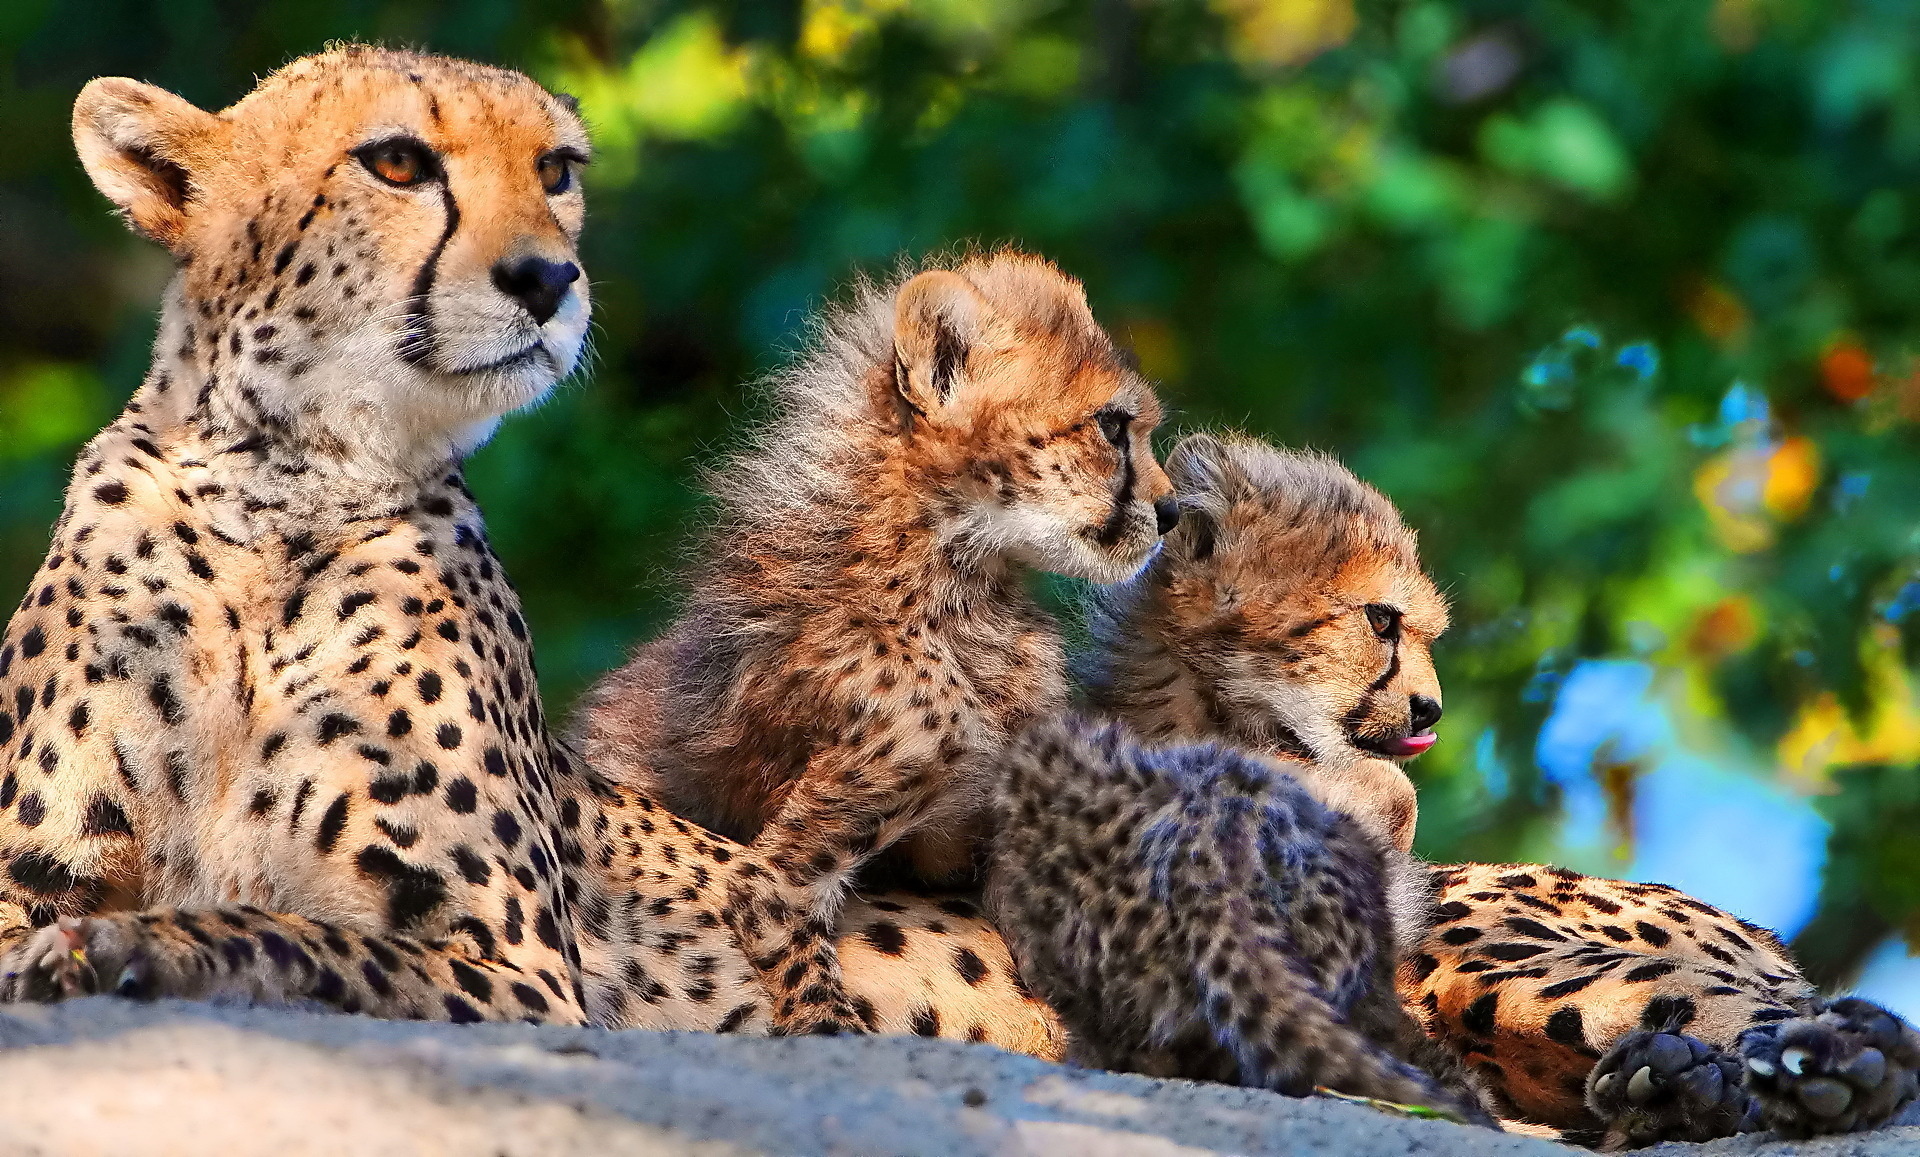 Cheetah Backgrounds free download Wallpapers, Backgrounds